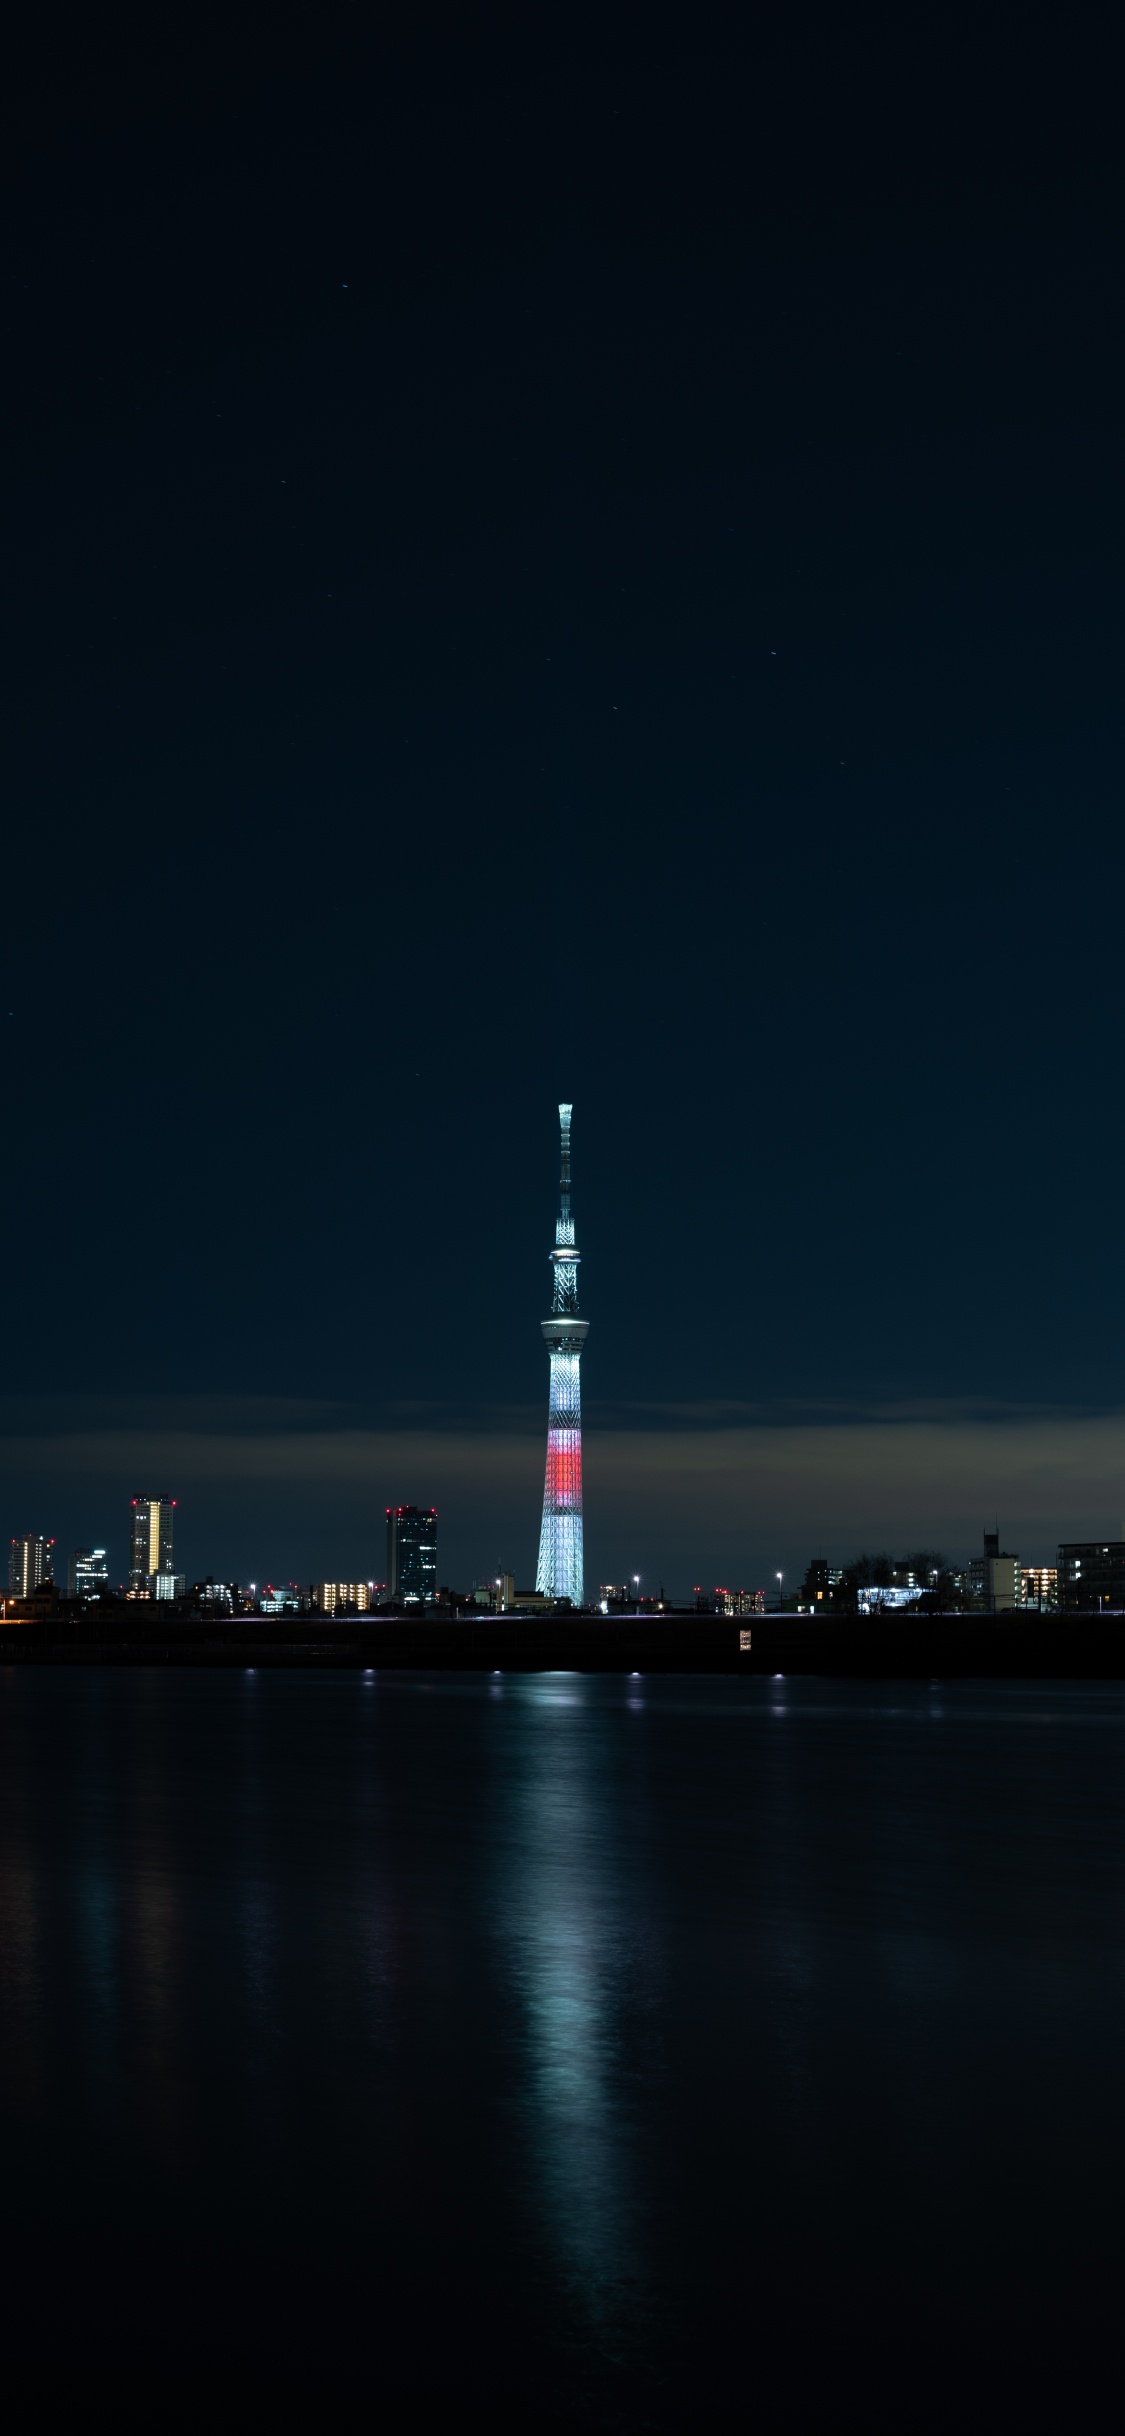 White and Red Tower Near Body of Water During Night Time. Wallpaper in 1125x2436 Resolution